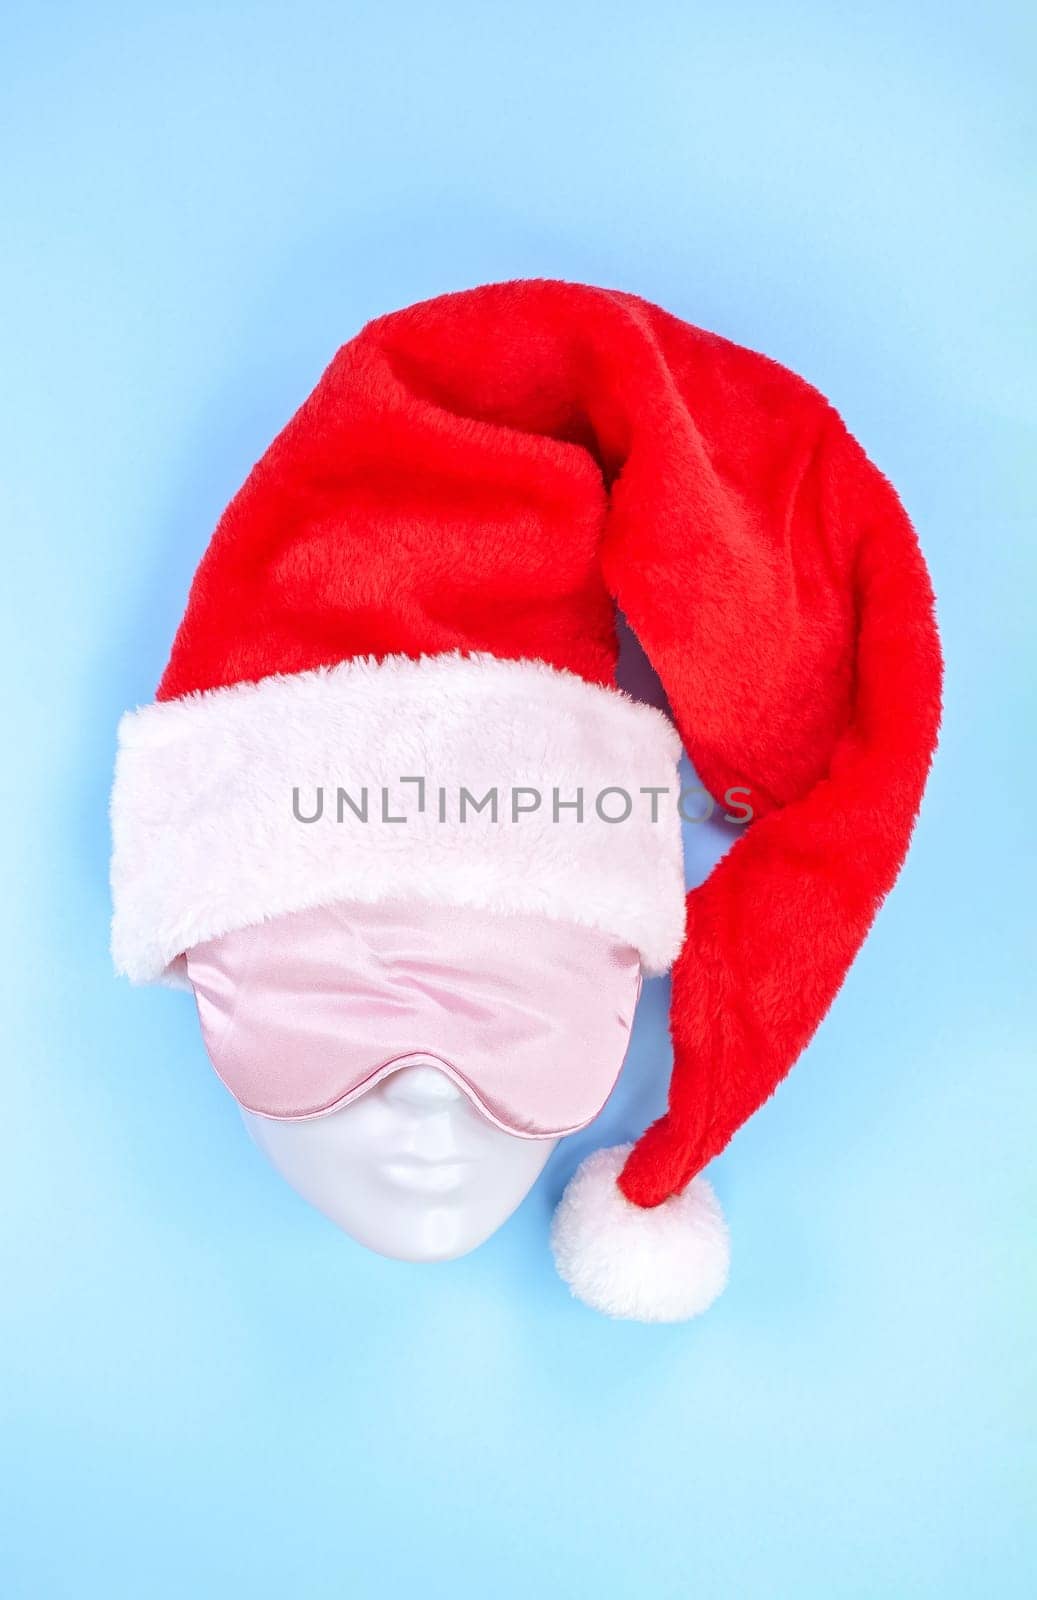 Pink sleeping eye mask on mannequin face with red christmas hat on blue background, sleeping disorder. Holidays, Head accessory. Last minute shopping sickness, Plastic face